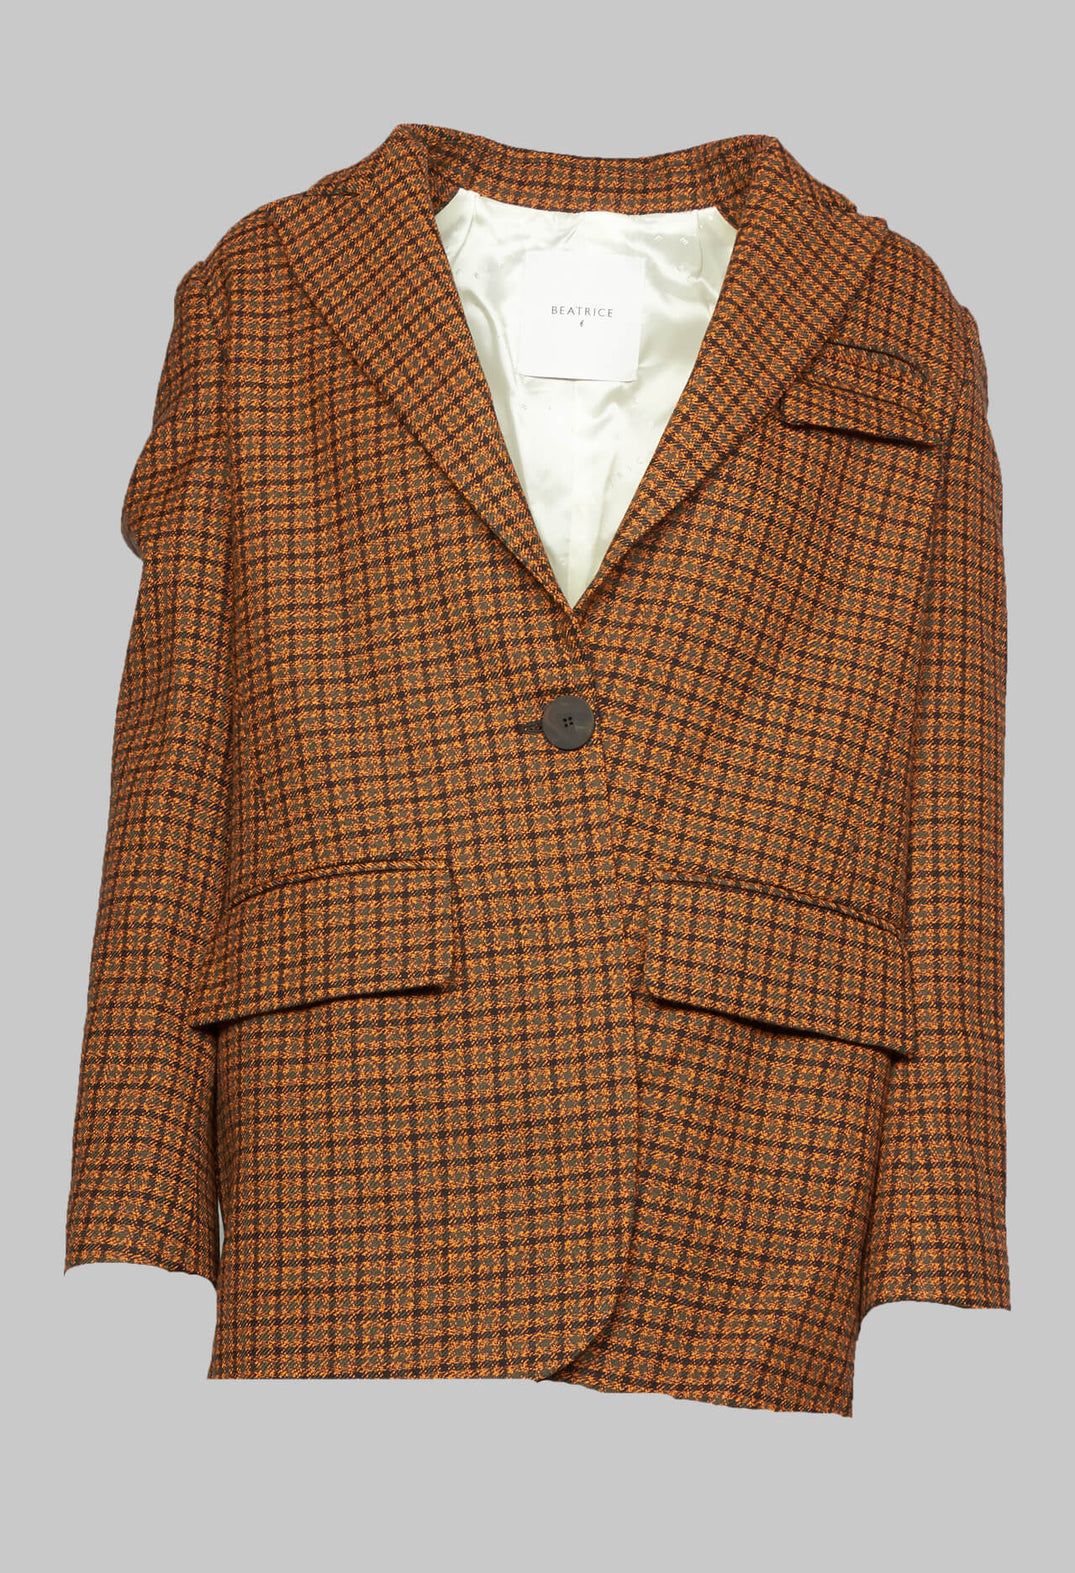 orange print houndstooth jacket with front pockets and collar detailing